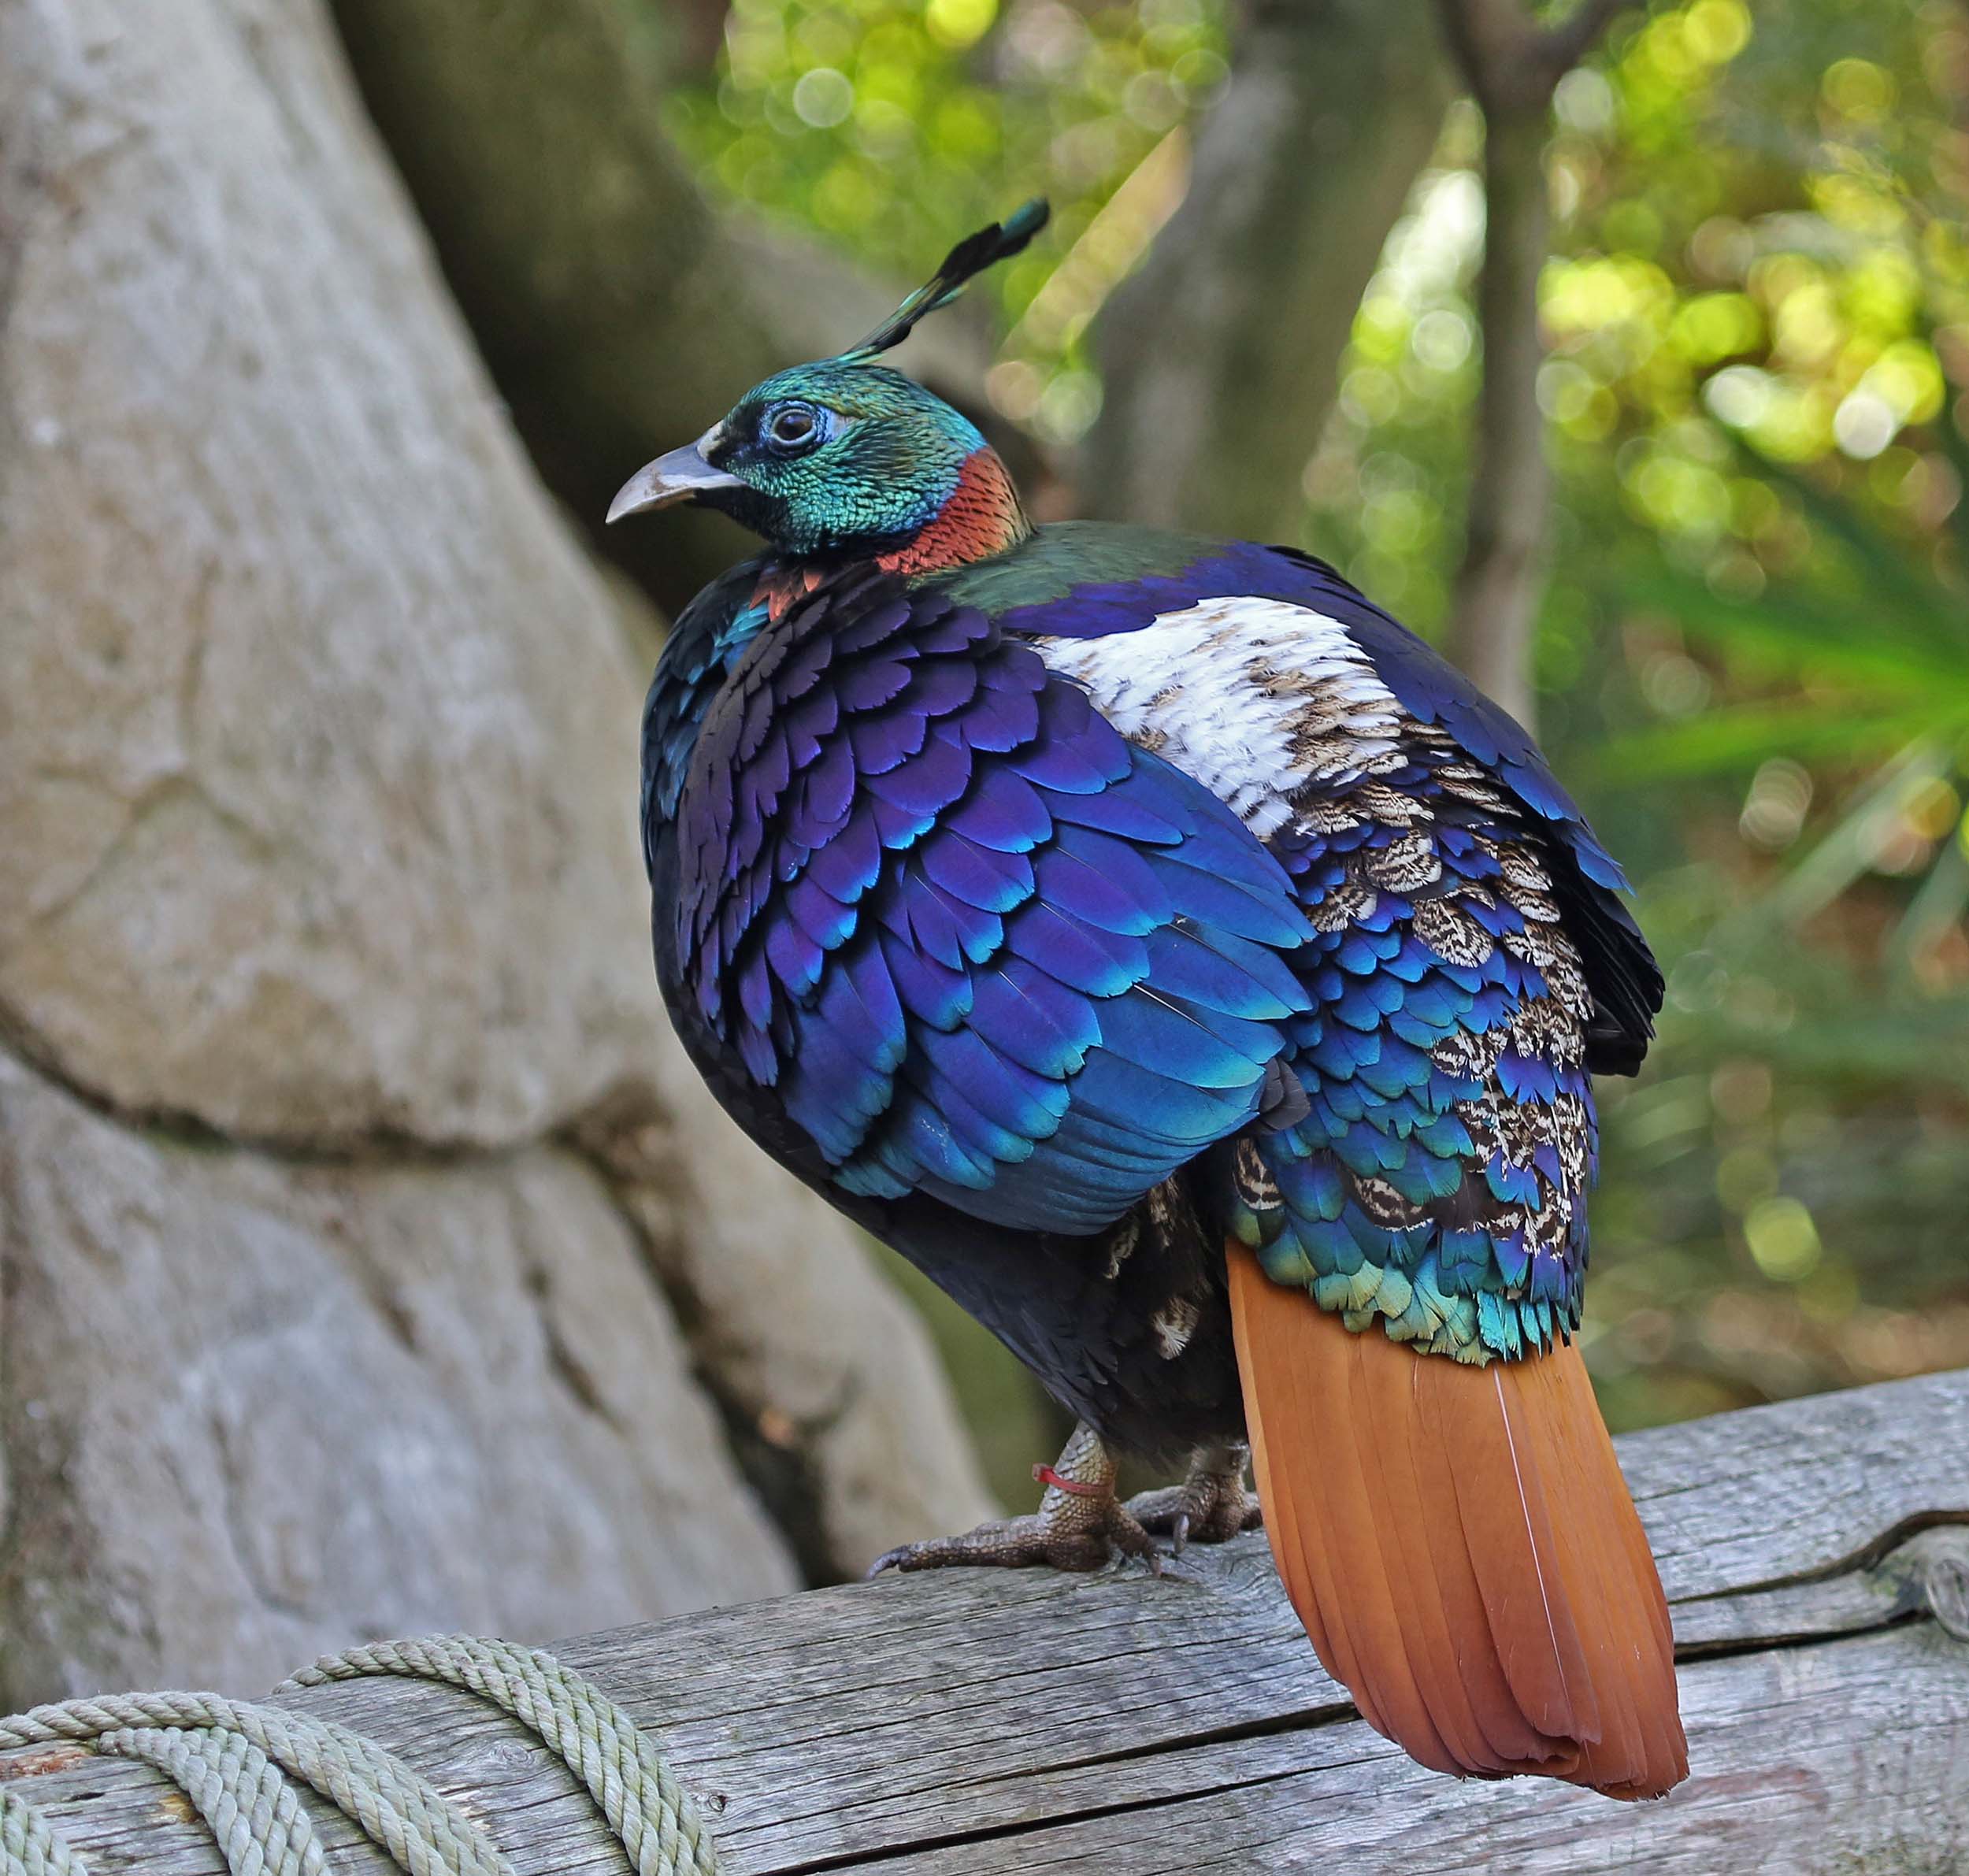 Pictures and information on Himalayan Monal